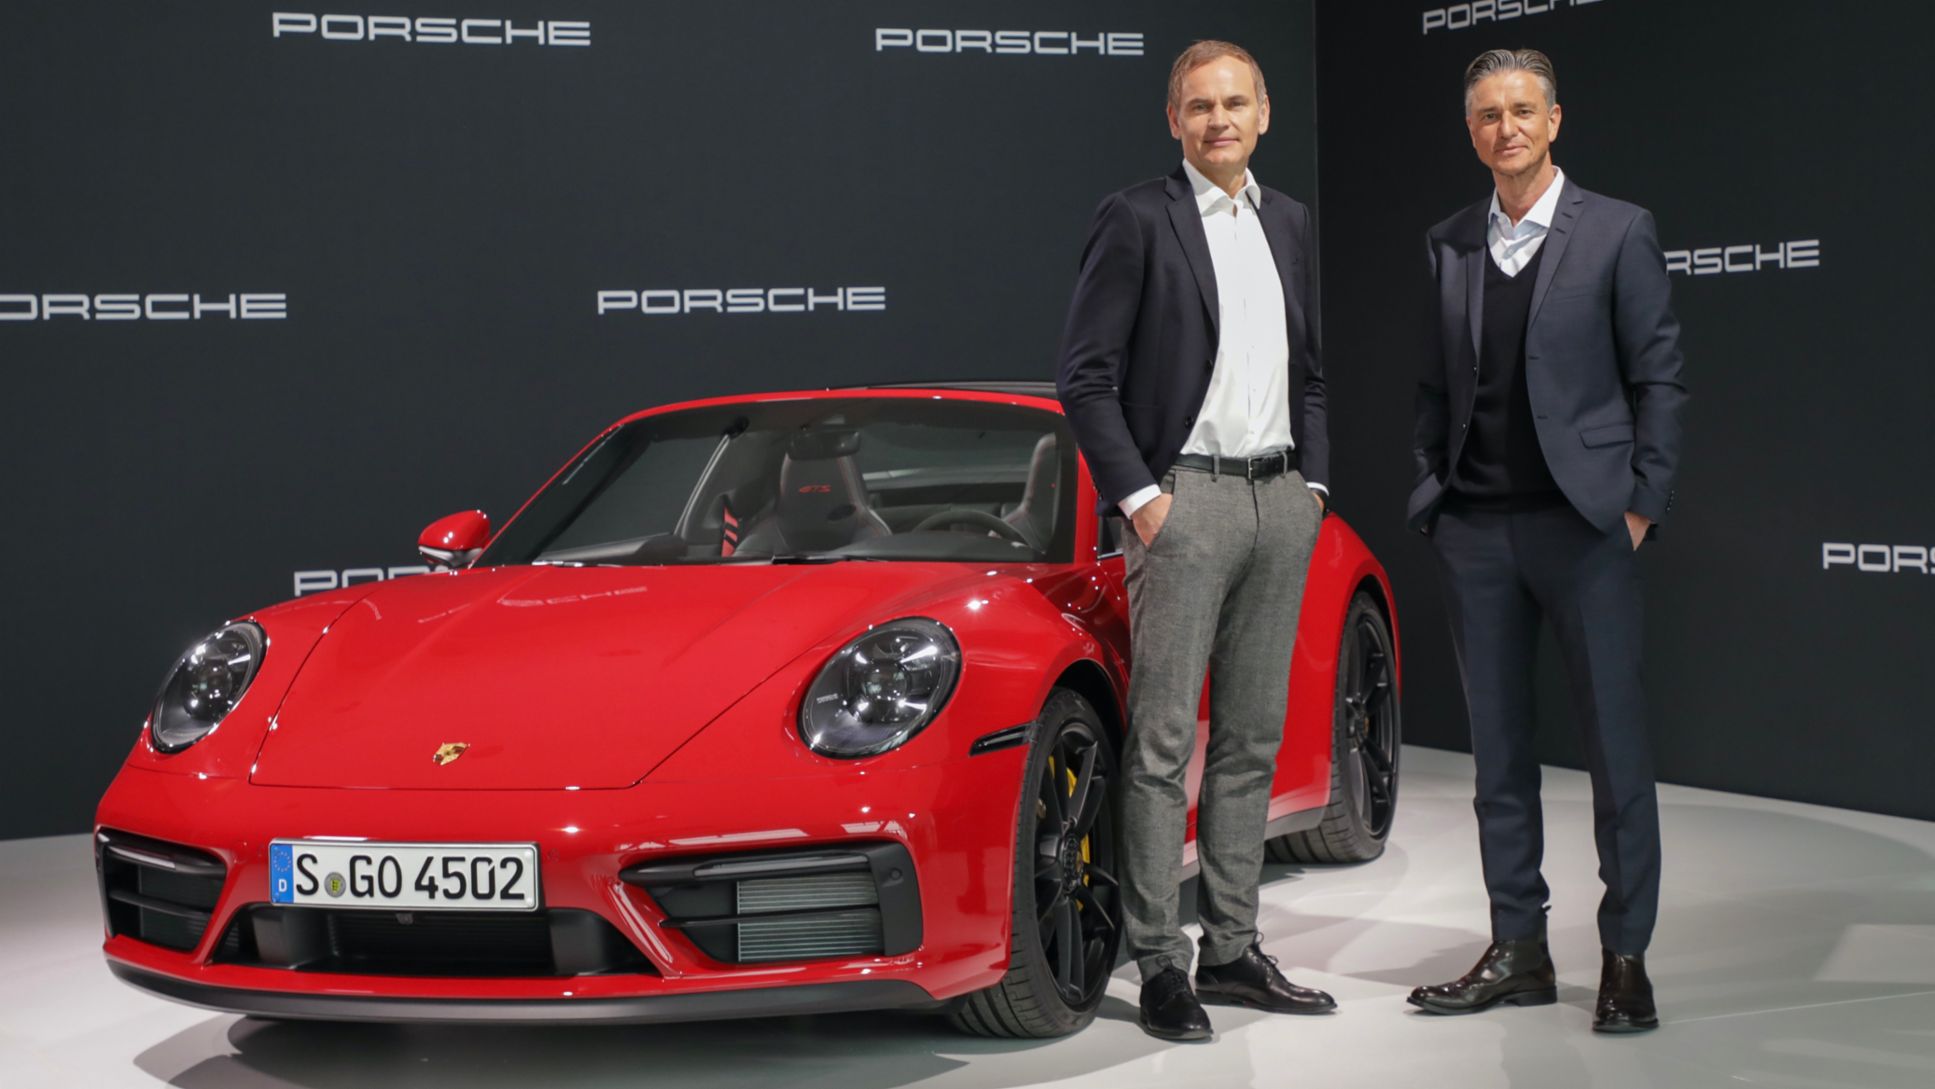 Oliver Blume, Chairman of the Executive Board of Porsche AG, Lutz Meschke, Deputy Chairman of the Executive Board and Member of the Executive Board responsible for Finance and IT of Porsche AG, l-r, 911 Targa 4 GTS, Annual Press Conference, 2022, Porsche AG